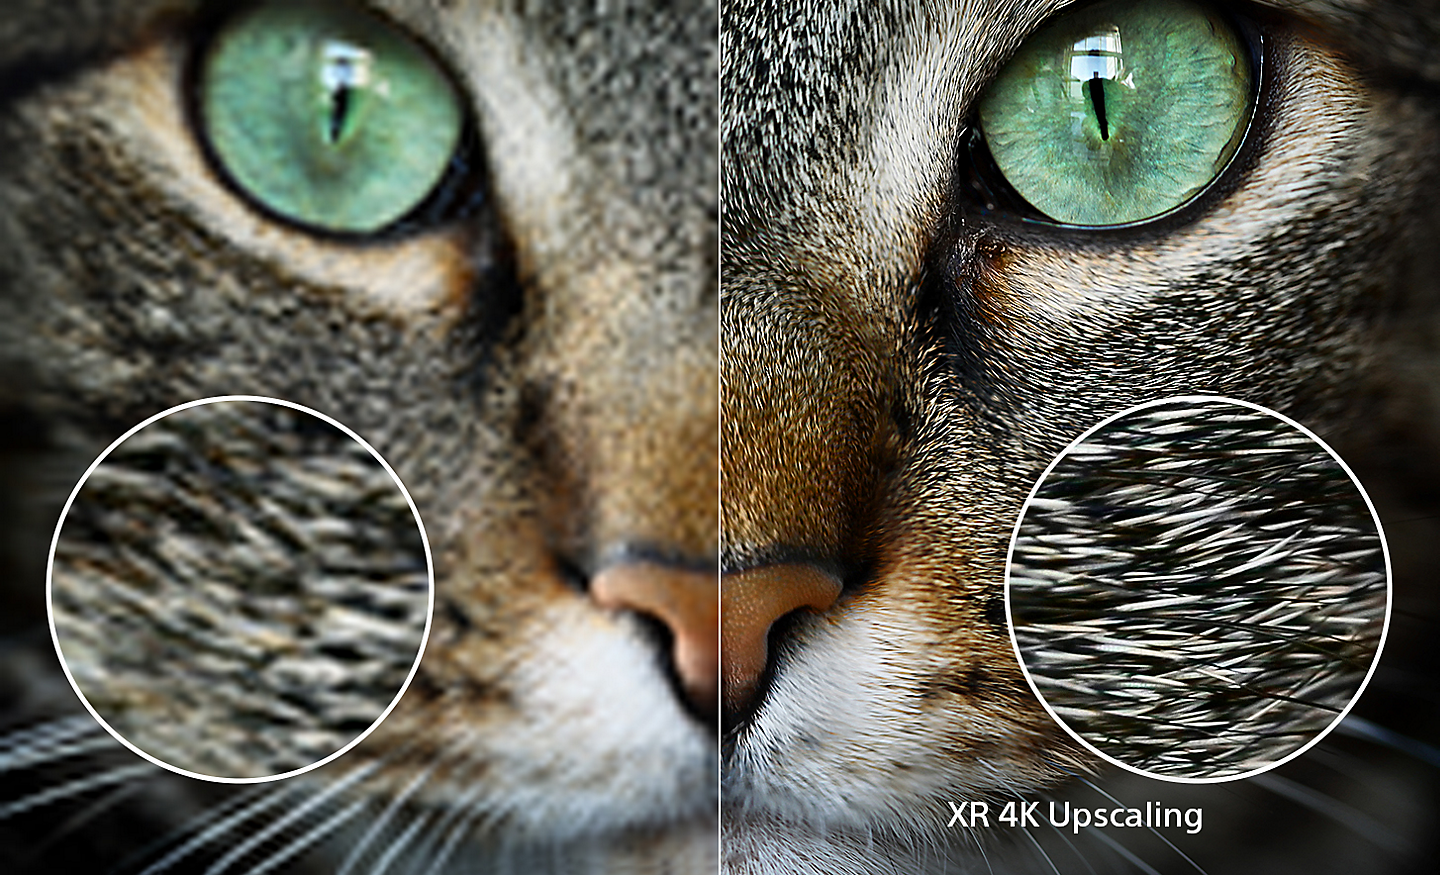 Split screen of cat's head with right side showing the extra detail after XR 4K Upscaling